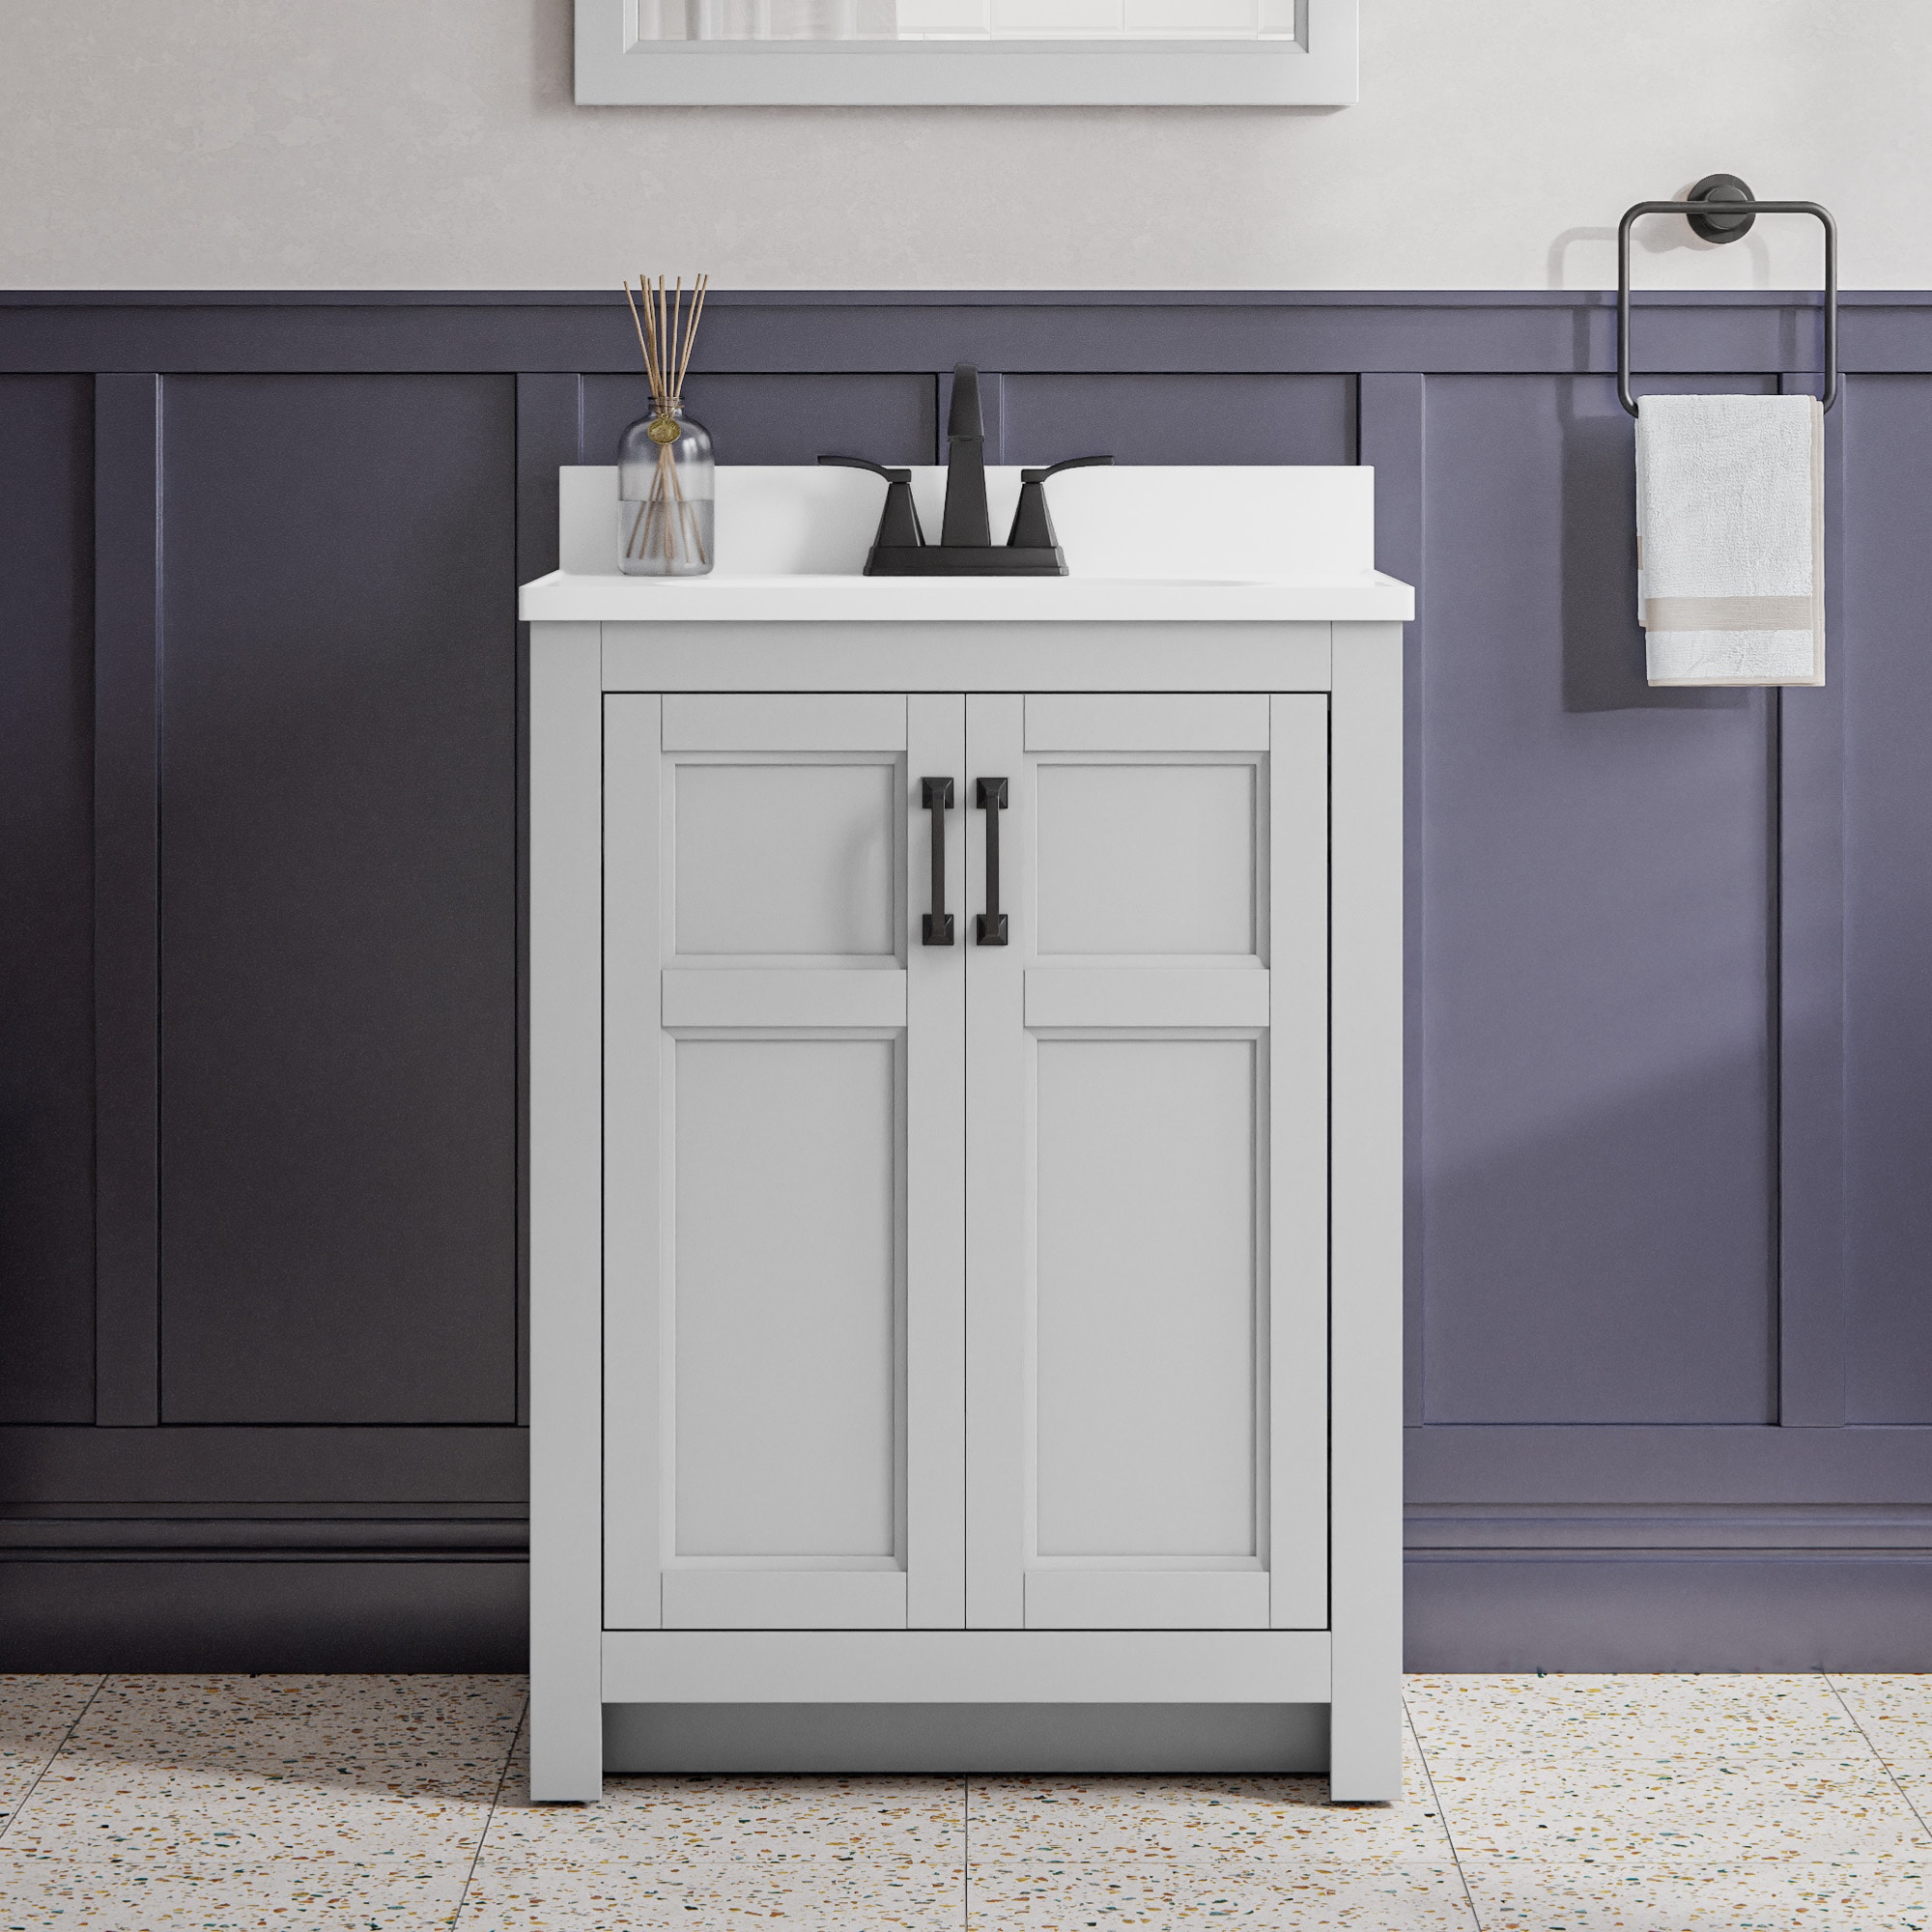 Style Selections Lowry 25 In Light Gray Single Sink Bathroom Vanity With White Acrylic Top At Lowes Com